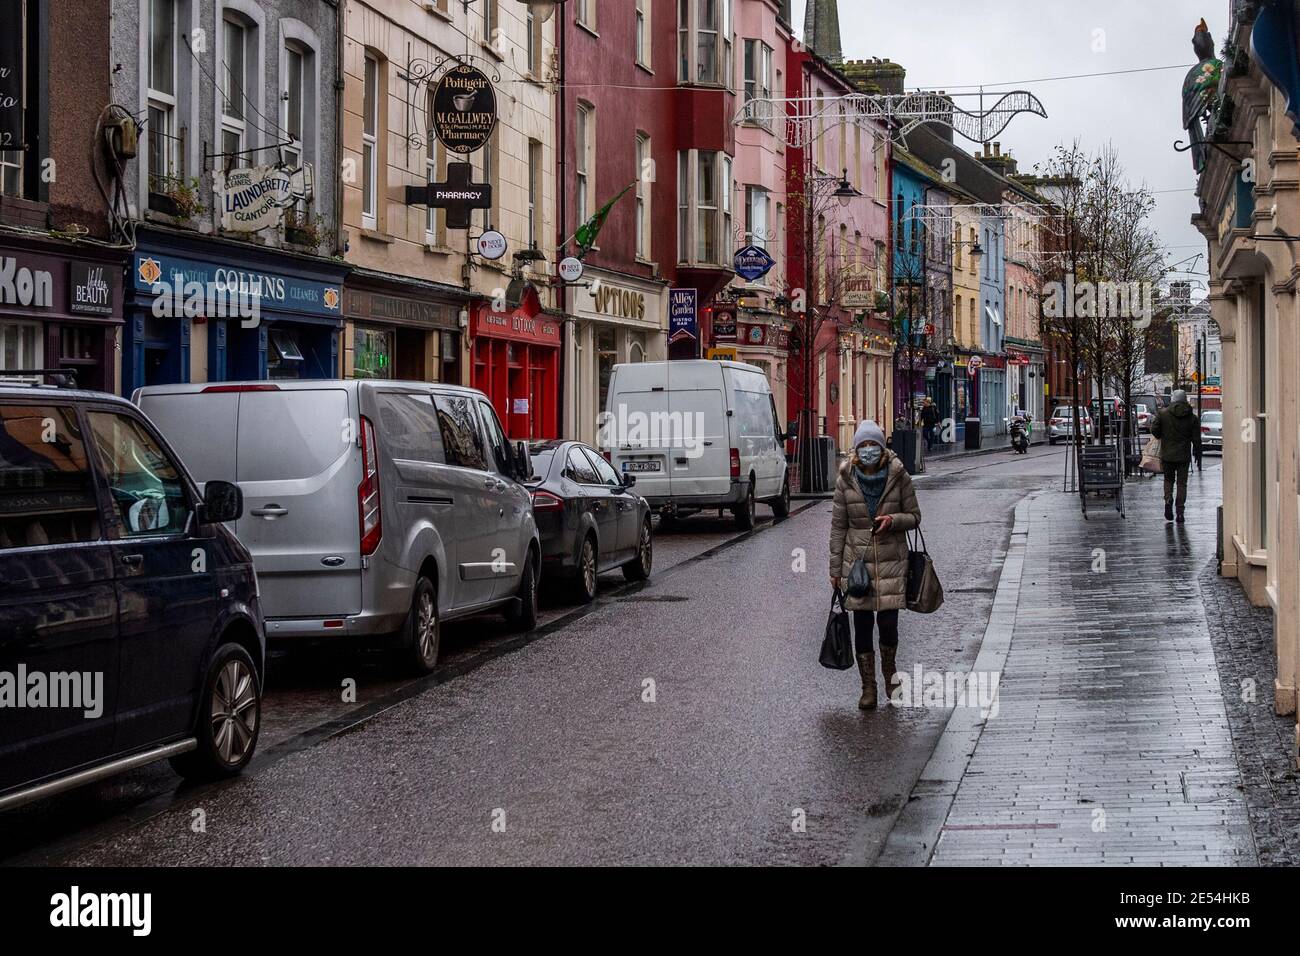 Clonakilty, West Cork, Ireland. 26th Jan, 2021. The Taoiseach, Michaél Martin, has confirmed the current level five lockdown will continue until March 5th in an attempt to slow the spread of the coronavirus. Only essential businesses and construction will be allowed to stay open during that time. Credit: AG News/Alamy Live News Stock Photo